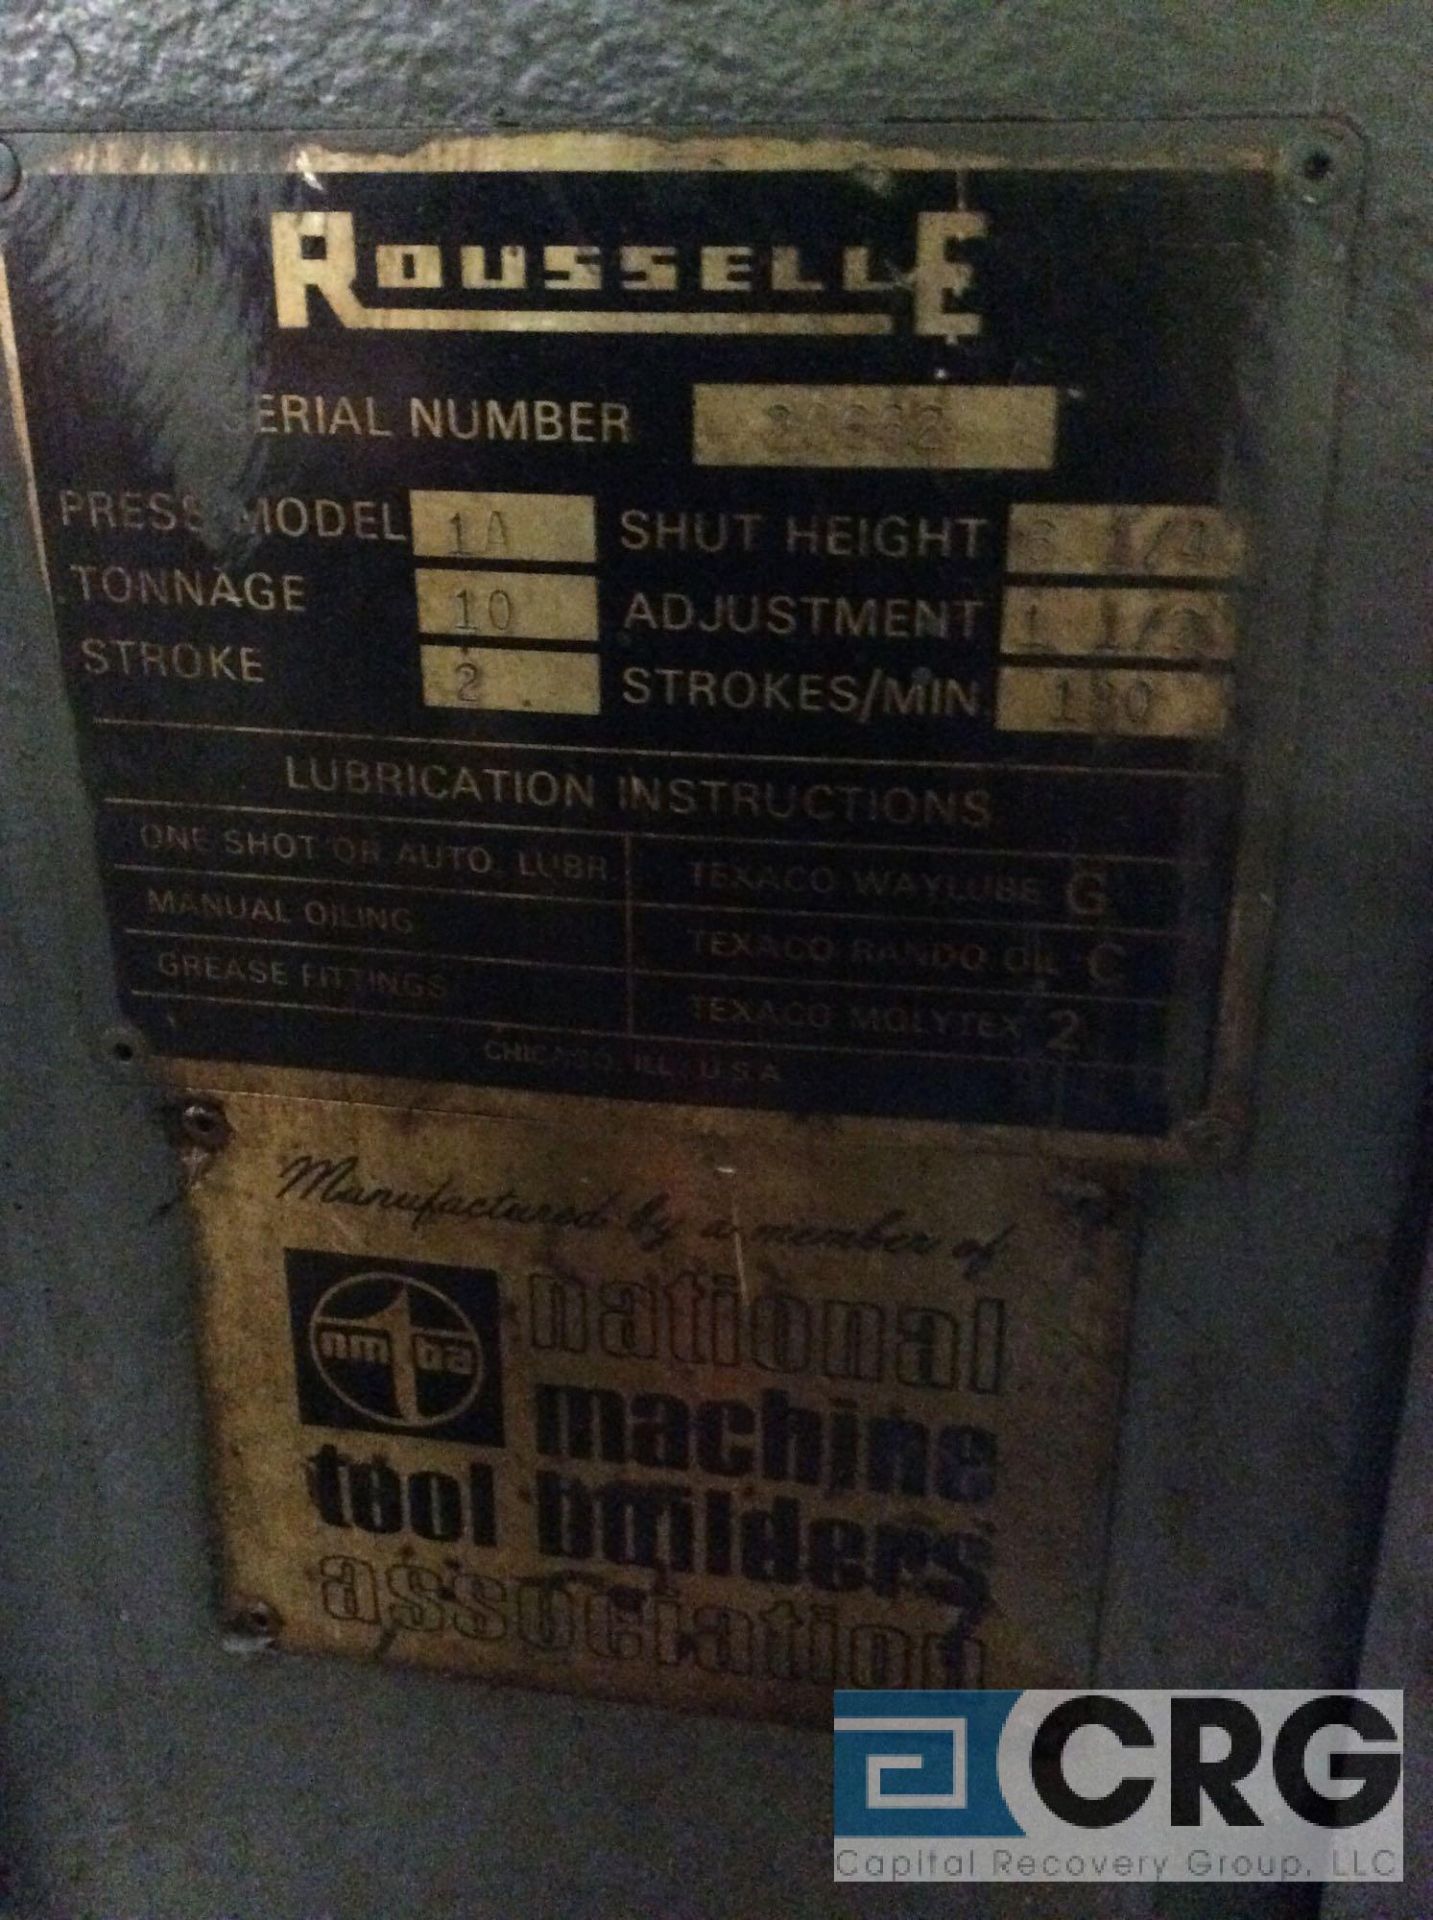 Rousselle 1A 10 ton punch press, sn 20662, 2 inch stroke, 6 1/4 inch shut height, 1 1/2 inch - Image 3 of 4